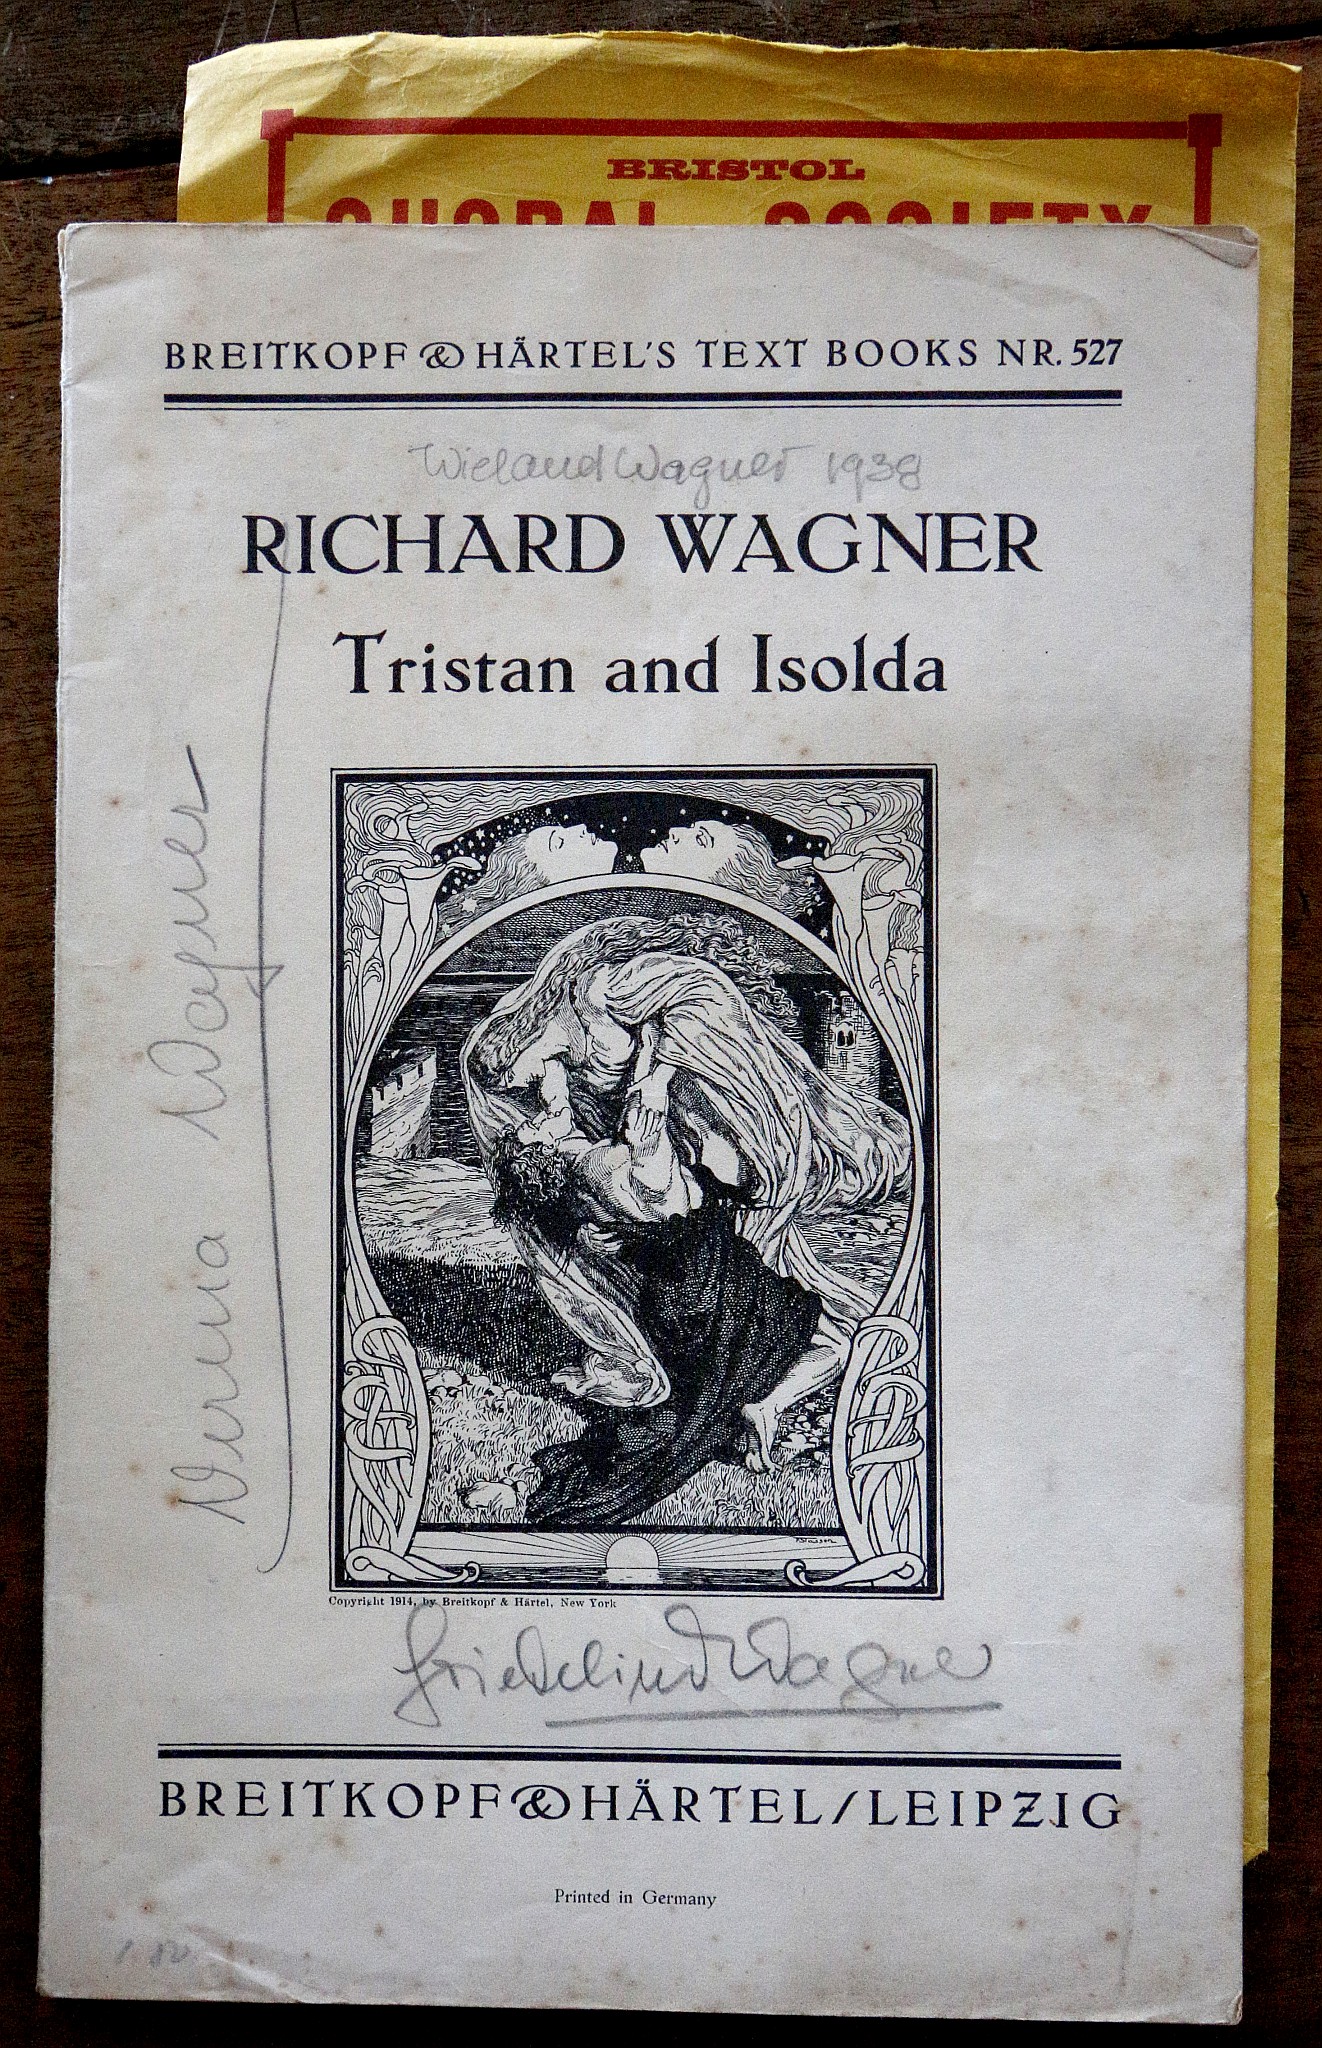 WAGNER, Siegfried (1869-1930). A collection of letters and correspondence from Wagner to Frederick